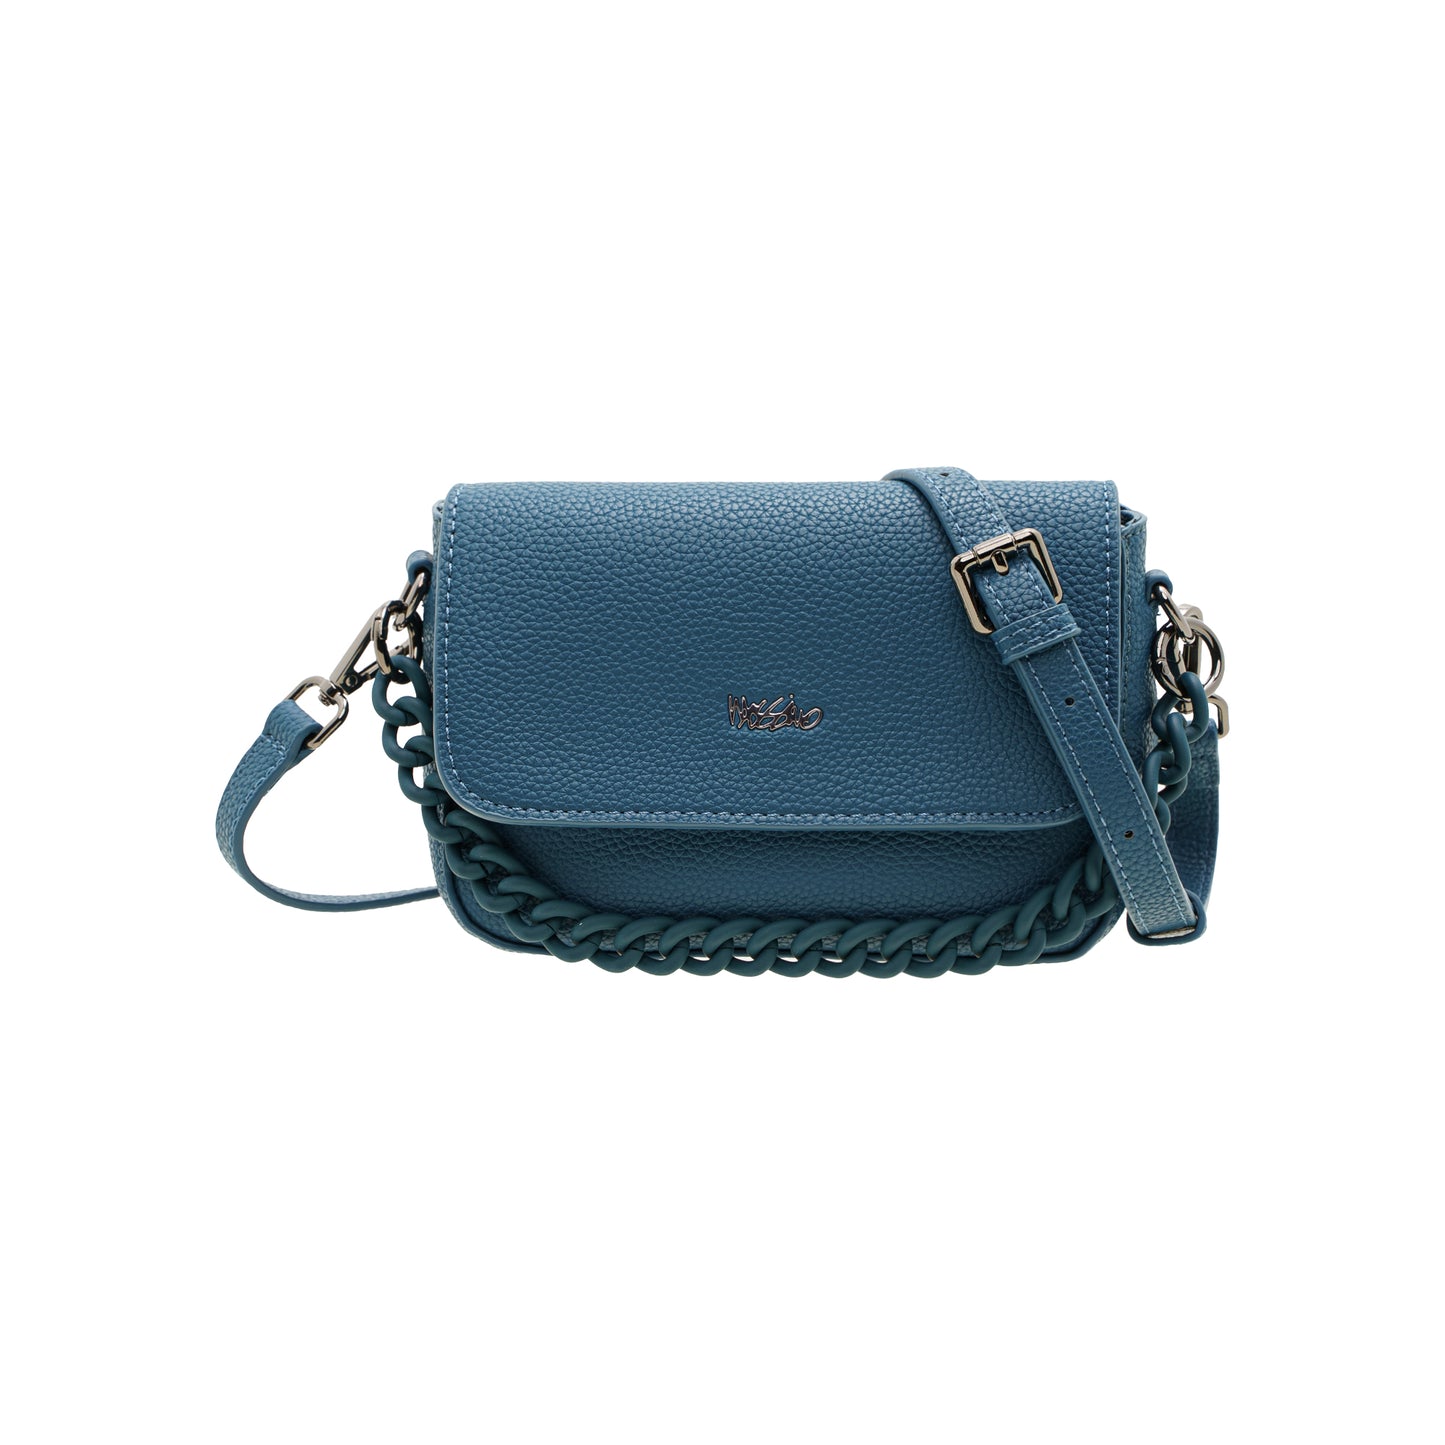 MOSSIMO Ladies Front Flap Sling Bag